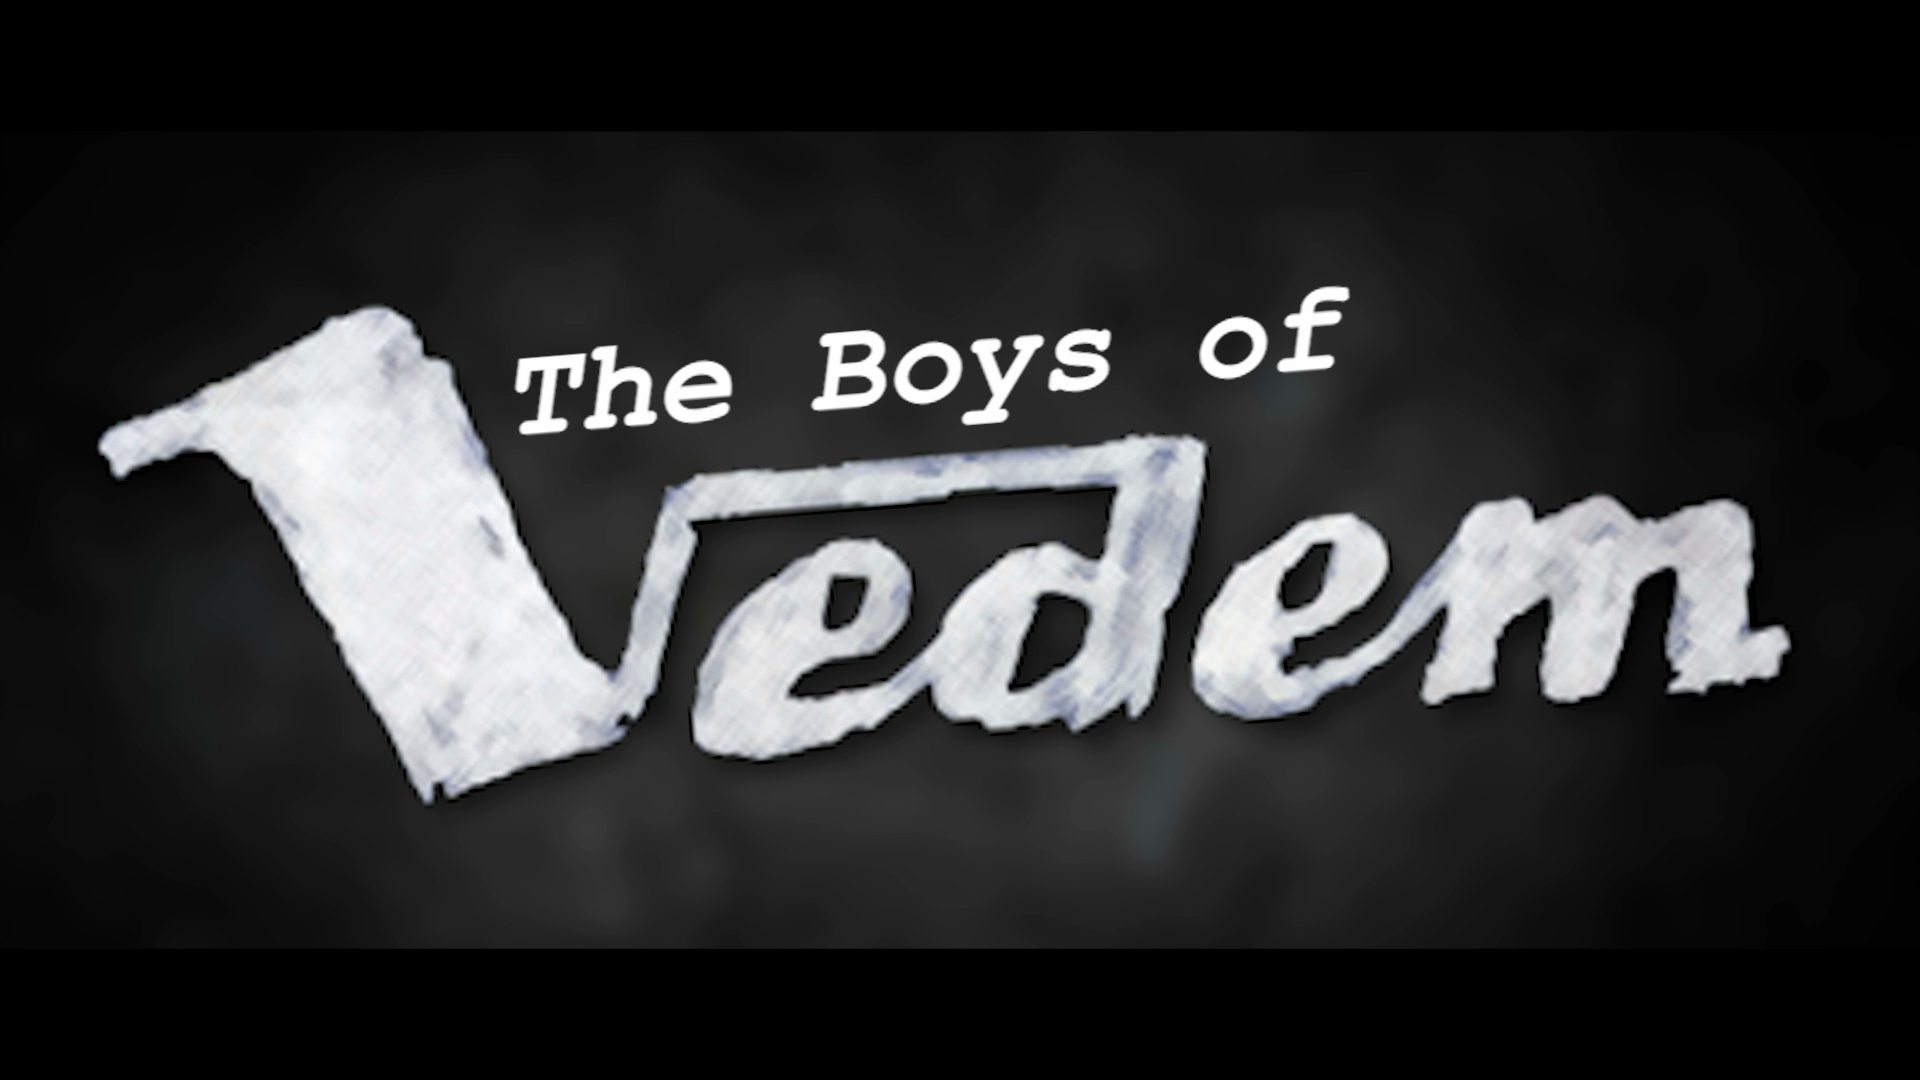 The Boys of Vedem